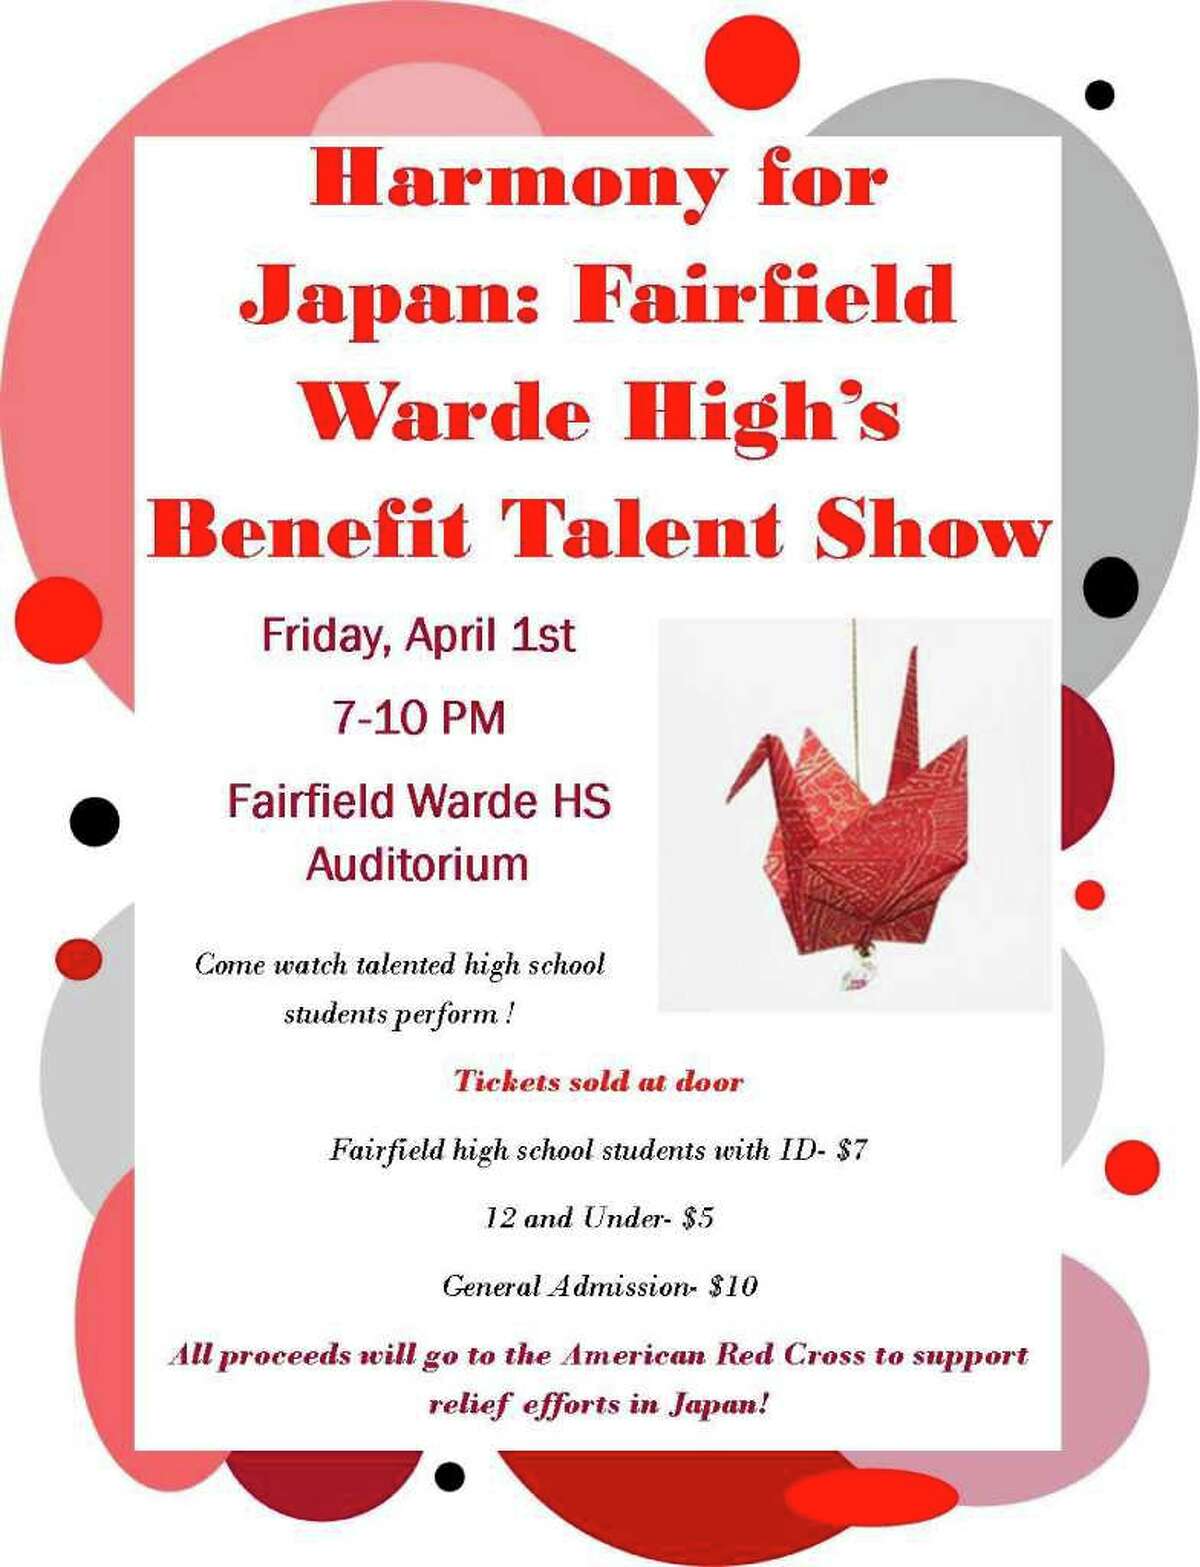 The Interact Club at Fairfield Warde High School, which puts on a benefit concert ever year, has decided to call this year's event "Harmony for Japan." Featuring talented members of the school community, all proceeds will be sent to Japan through the American Red Cross Foundation.